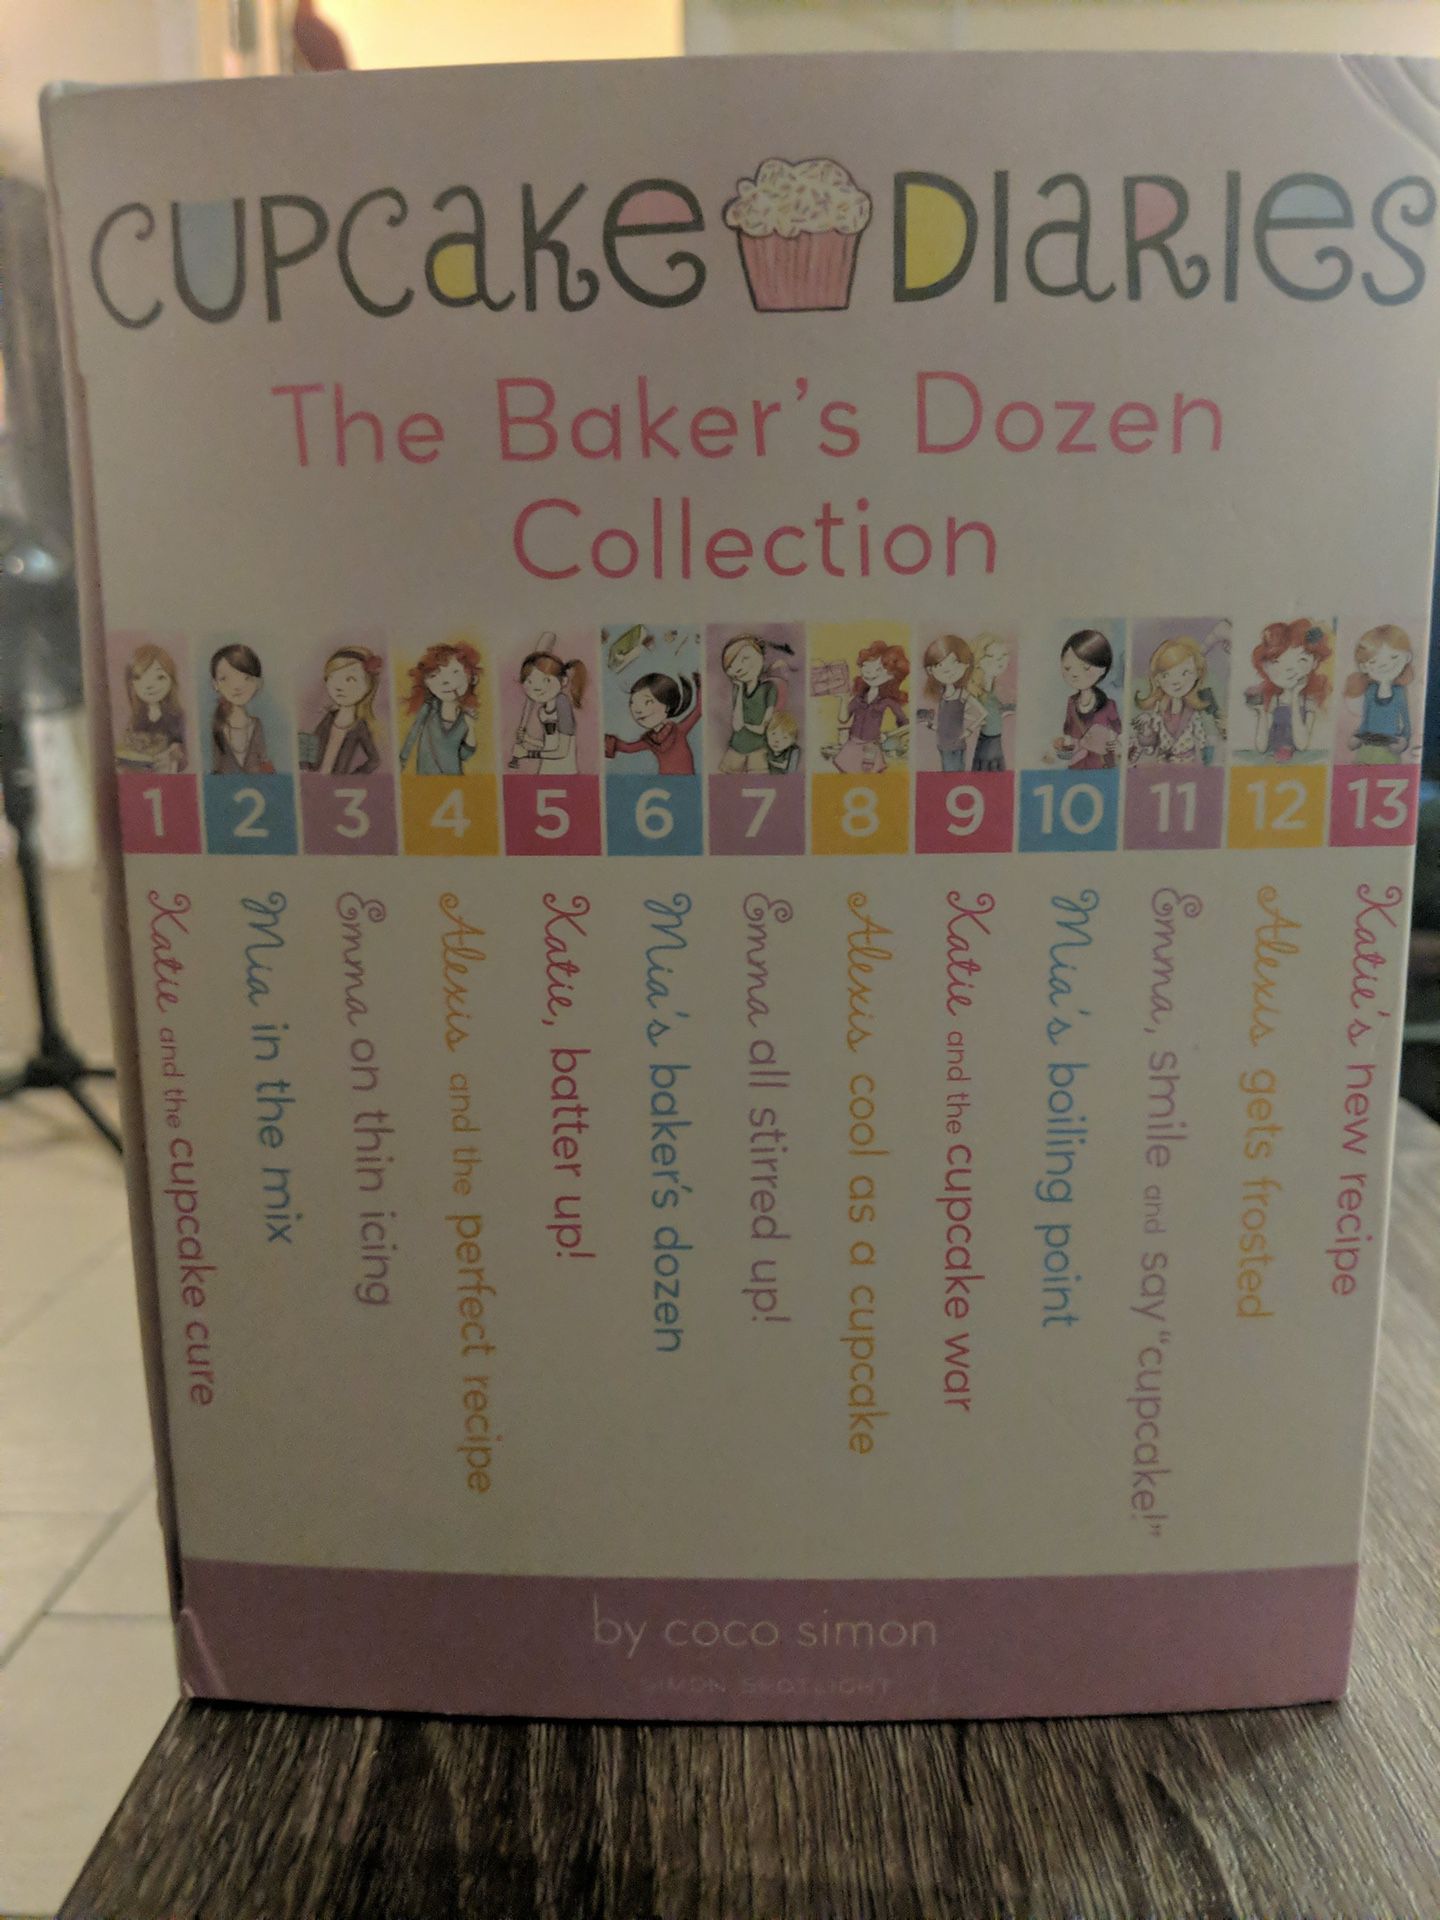 Cupcake diaries collection $25 